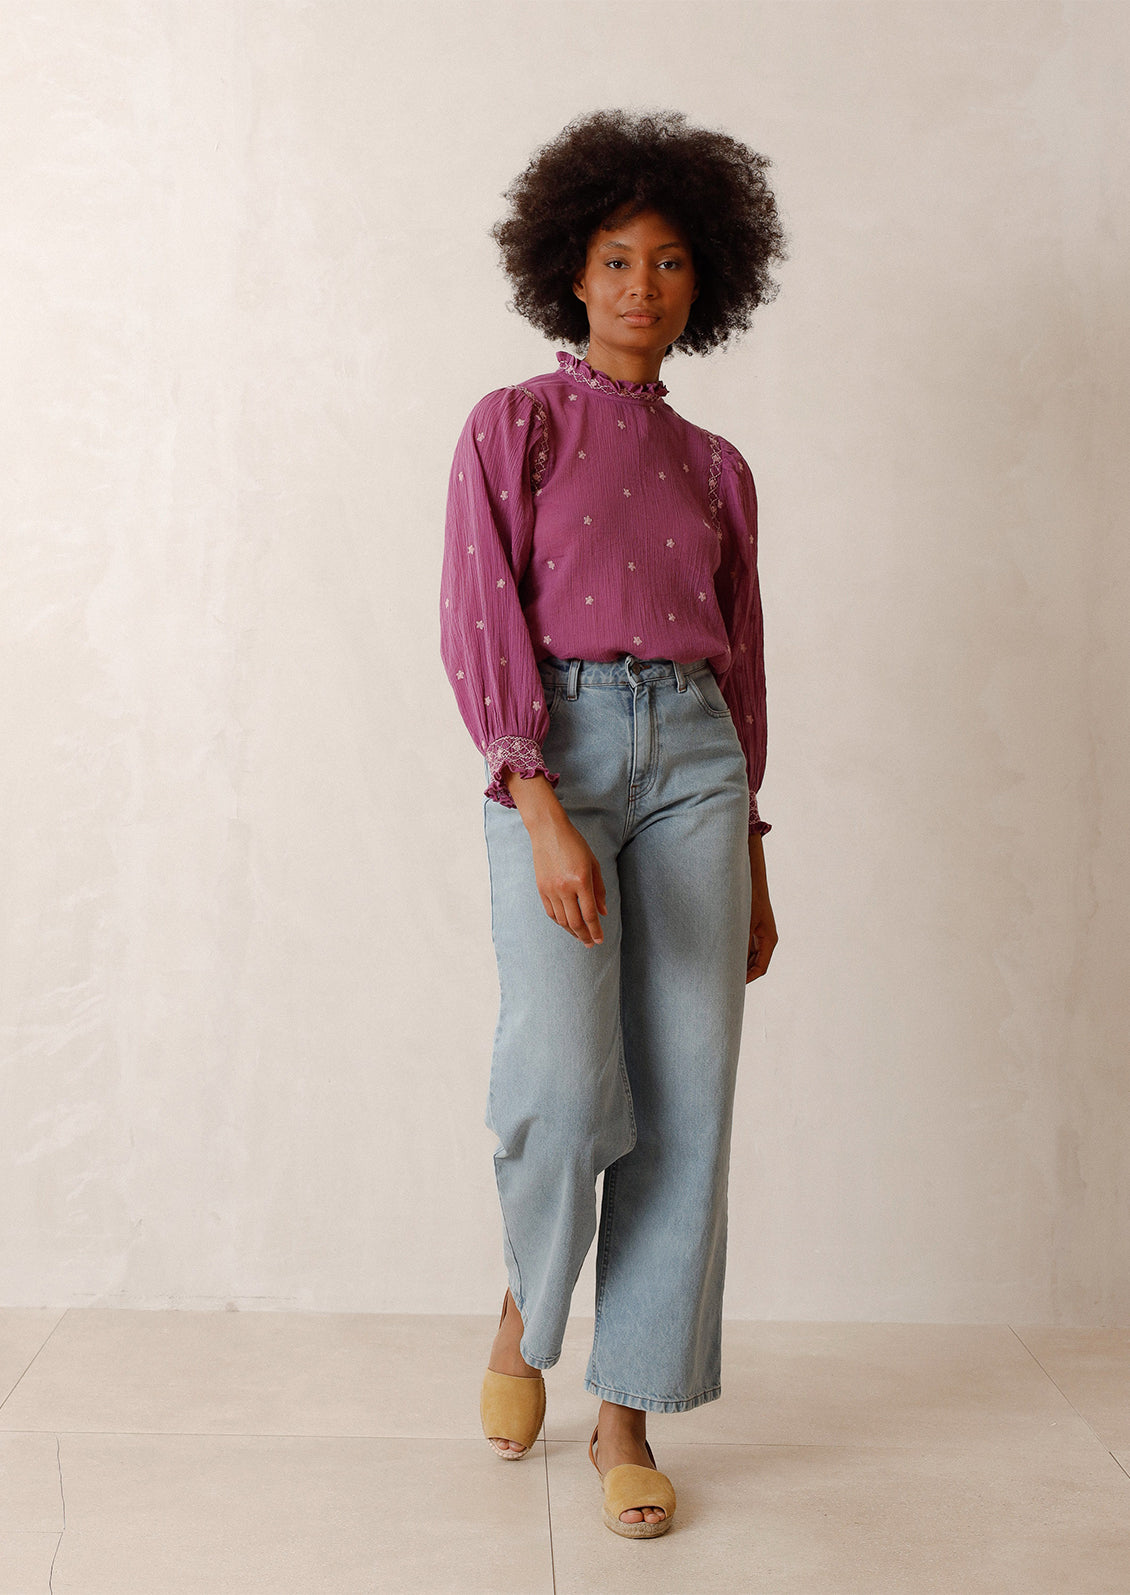 Woman wearing magenta top with embroidered details, blue jeans, and flats. 